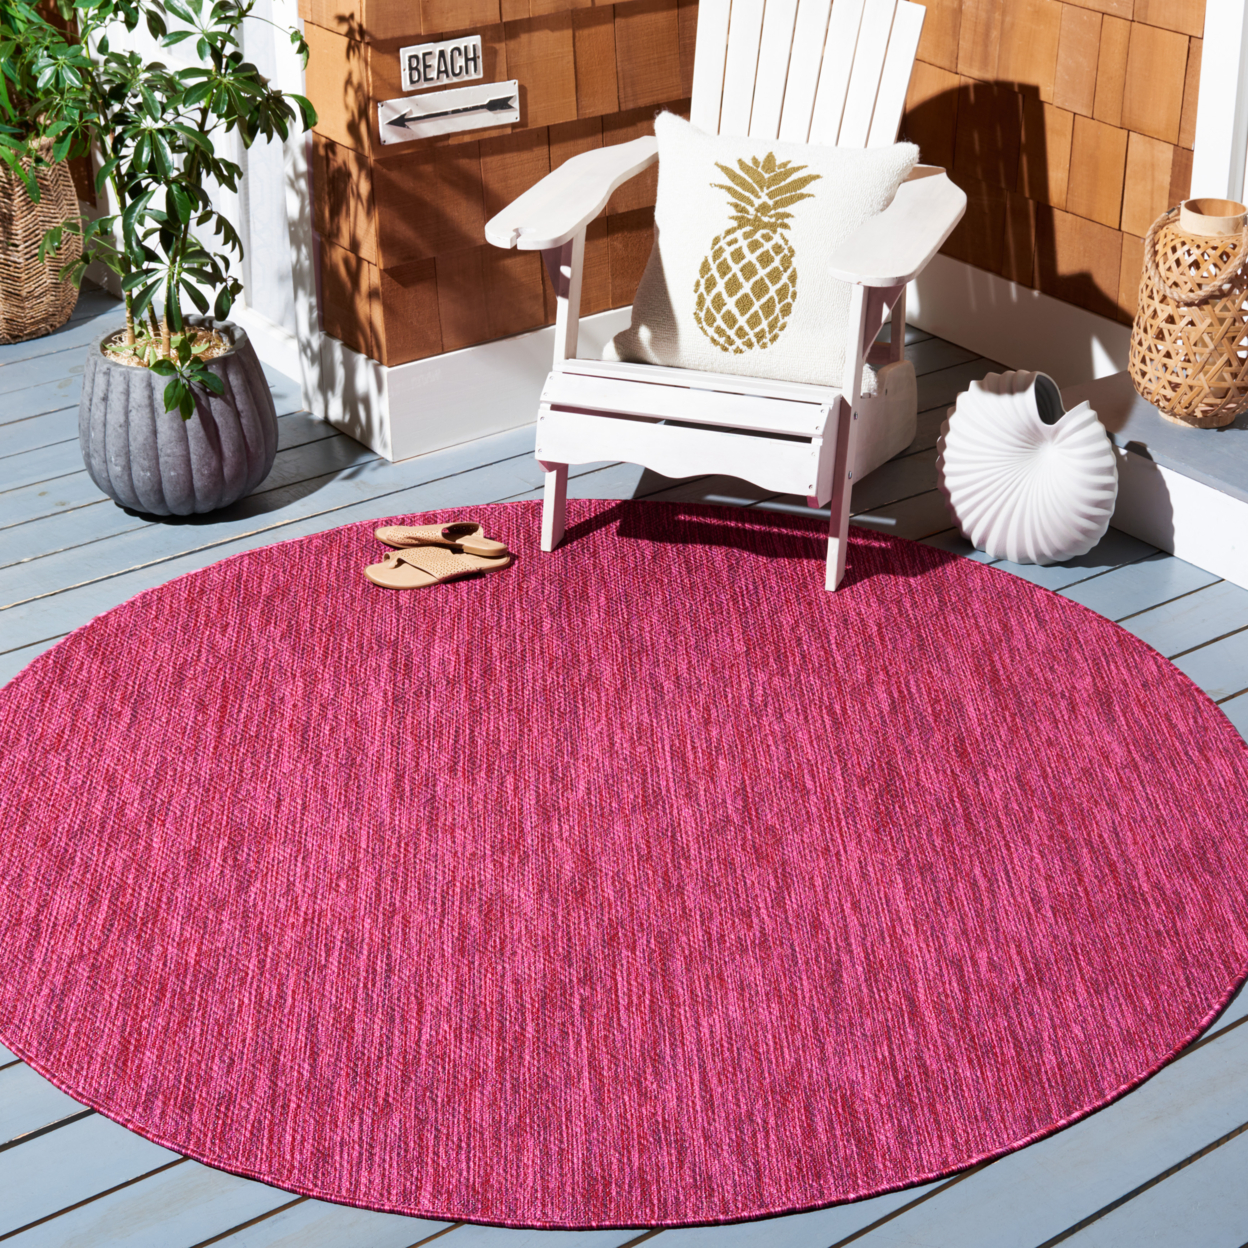 SAFAVIEH Outdoor CY8520-55922 Courtyard Collection Red Rug - 4' X 5' 7